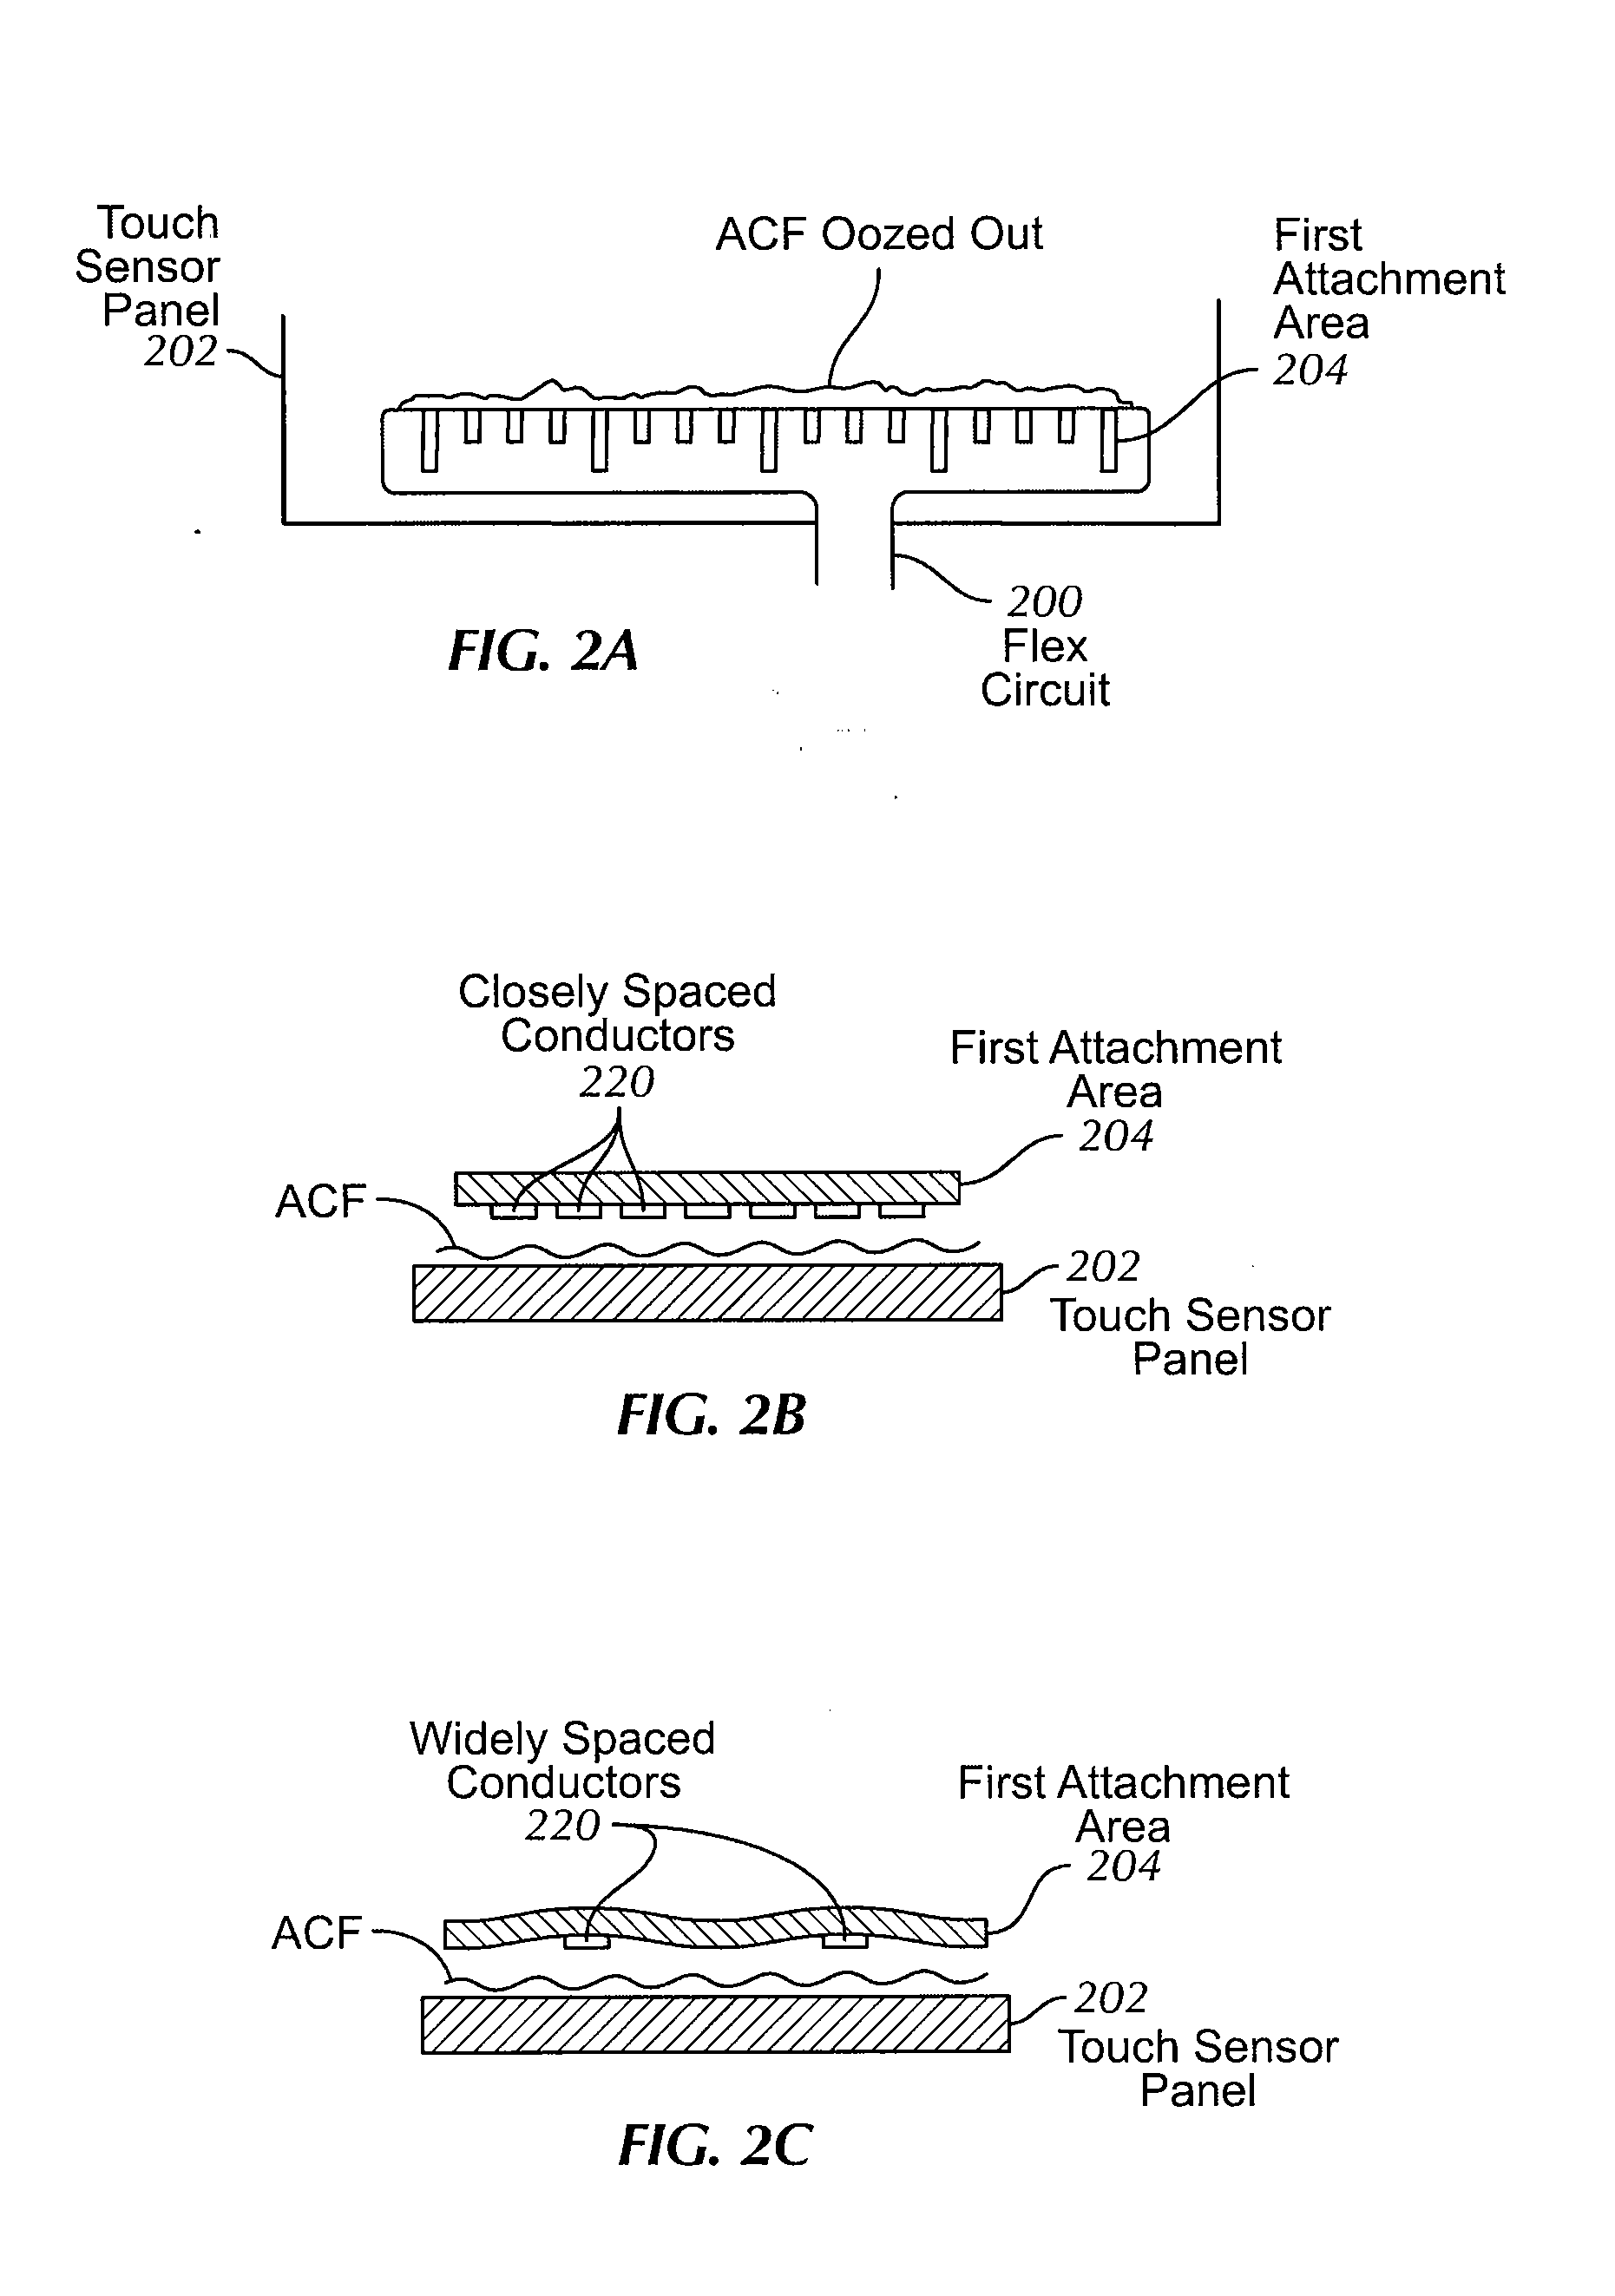 Flex Circuit with Single Sided Routing and Double Sided Attach